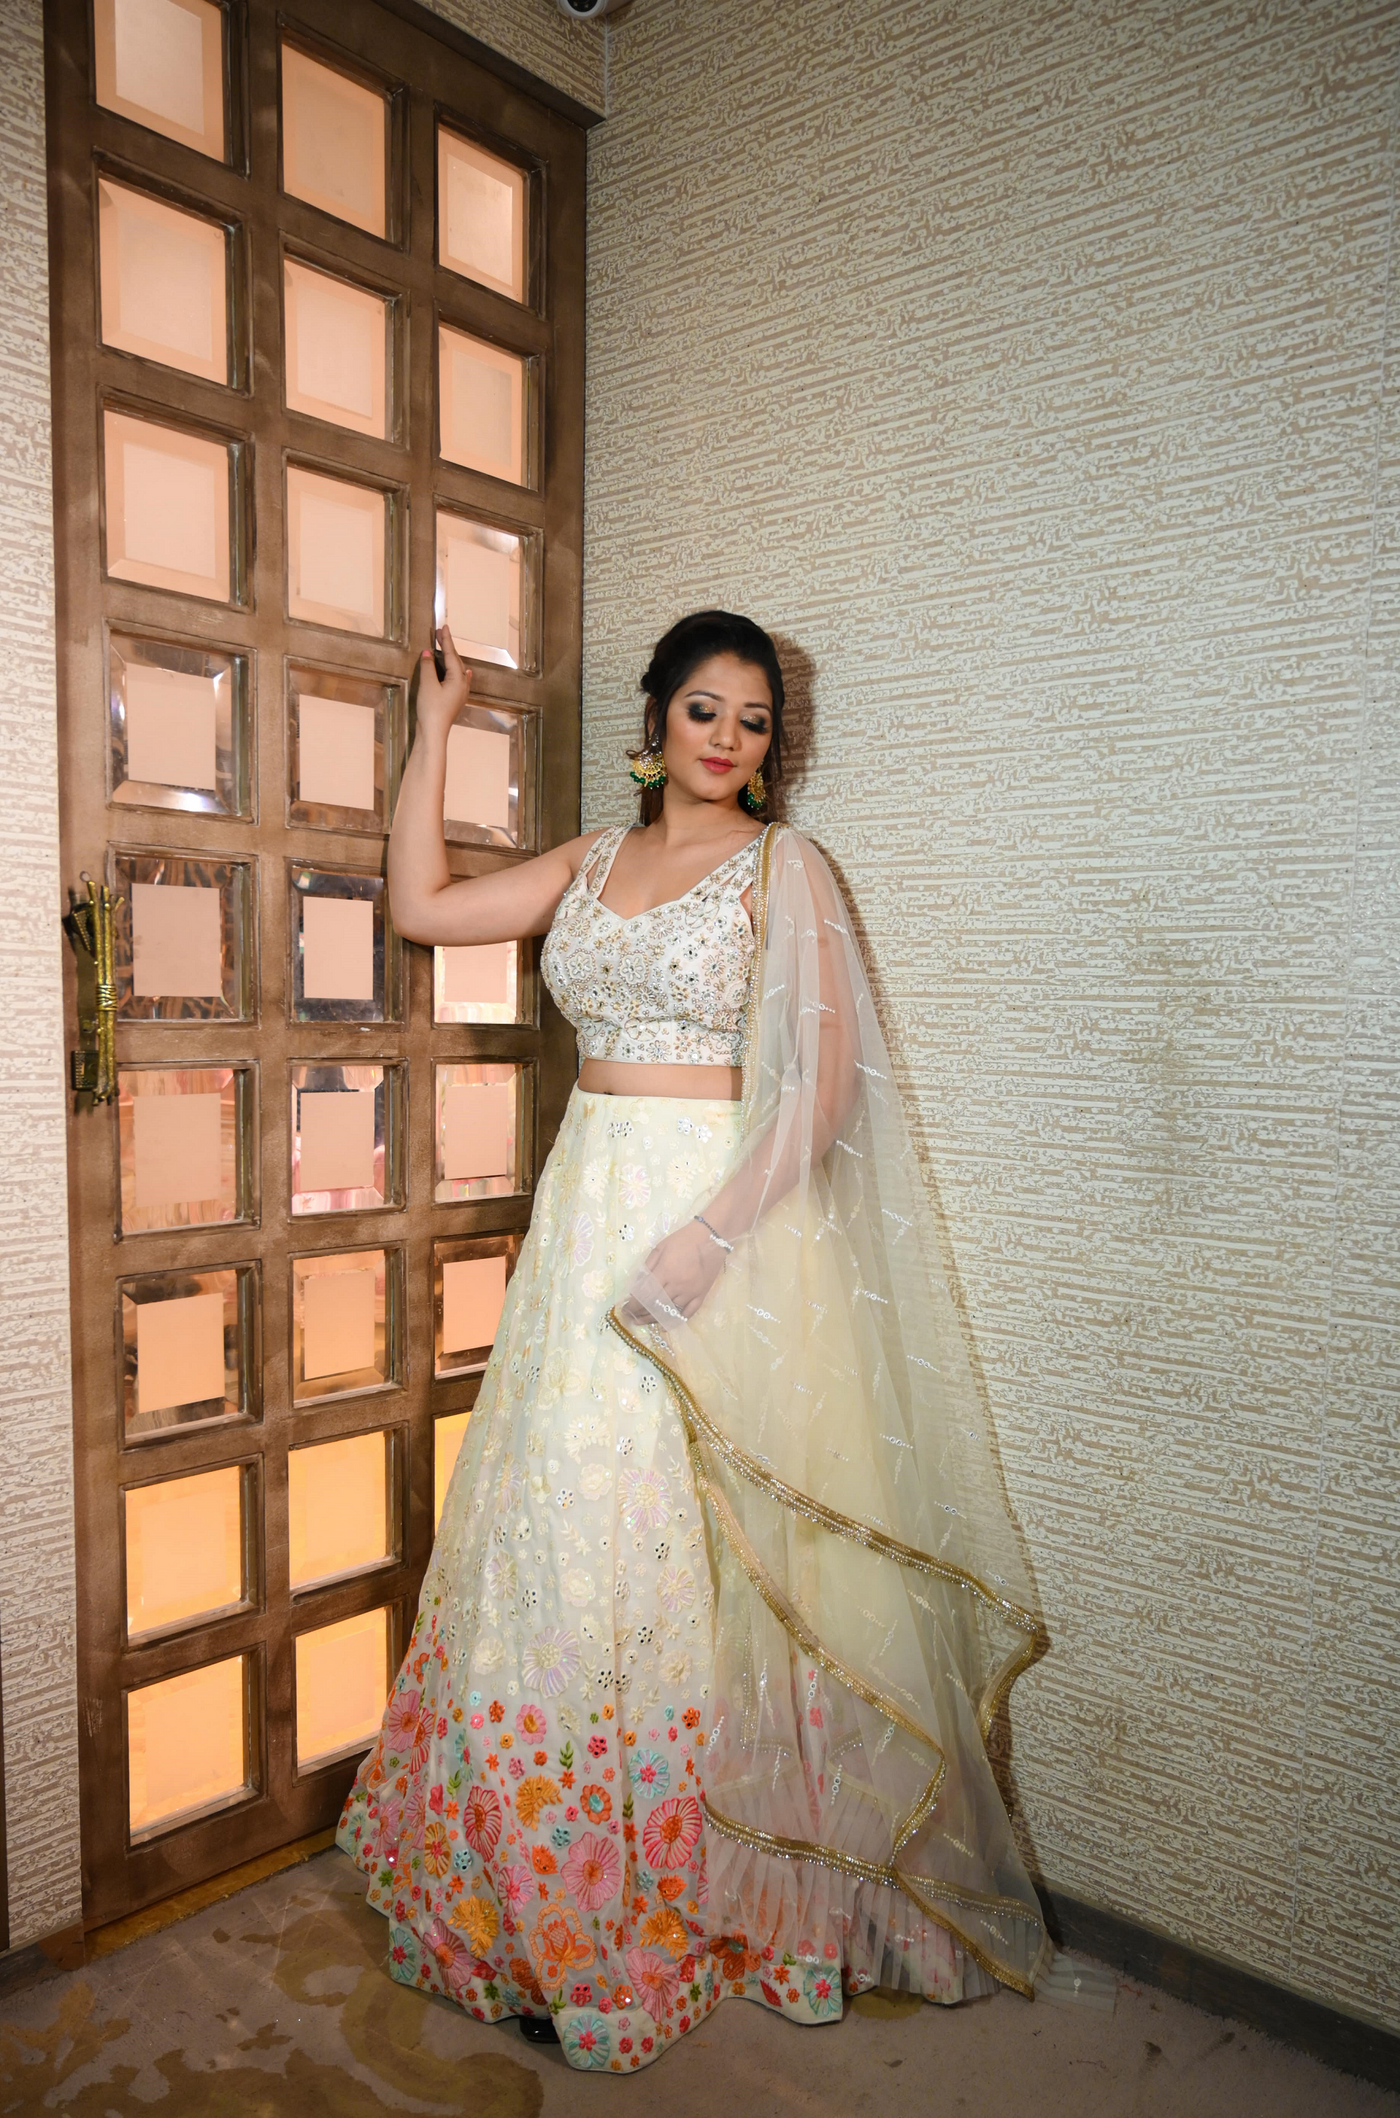 complete look of white floral lehenga